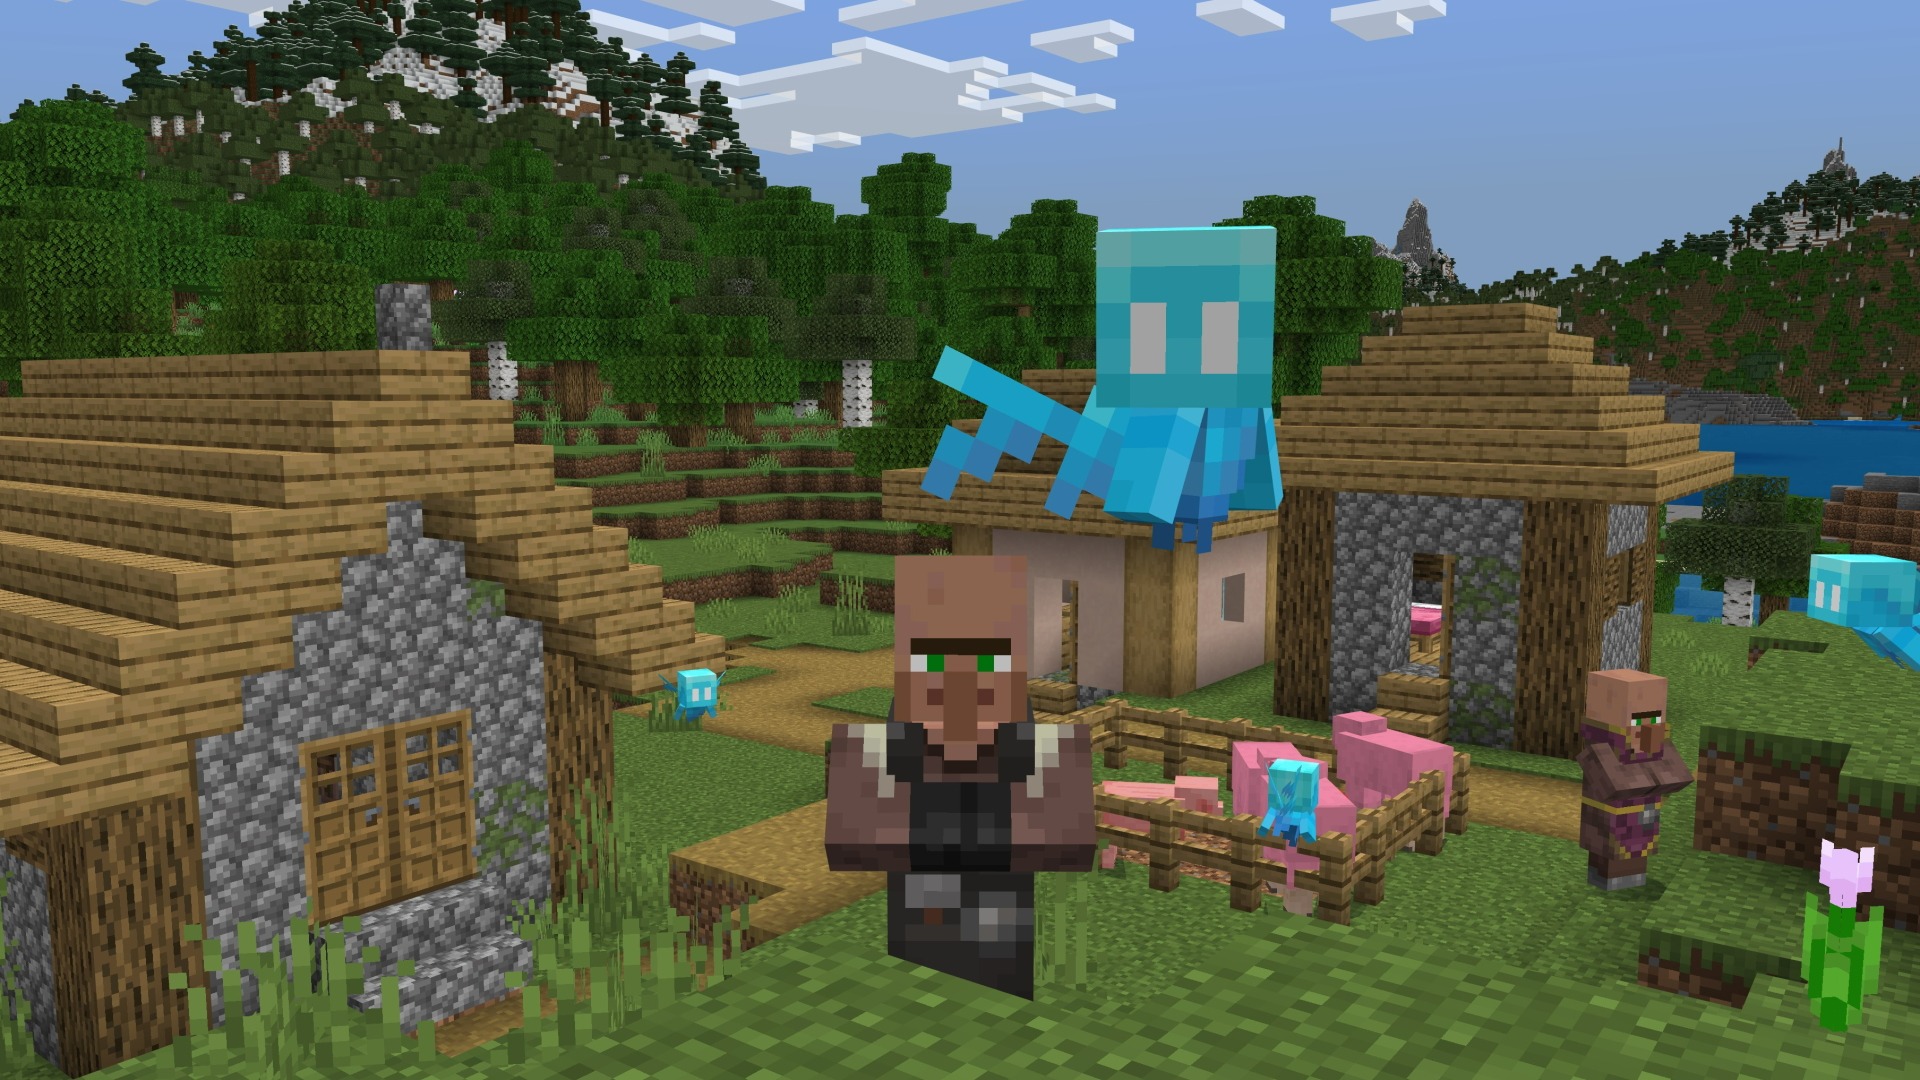 A Minecraft screenshot, featuring a Villager and Allays in a village, with pink sheep in a pen.